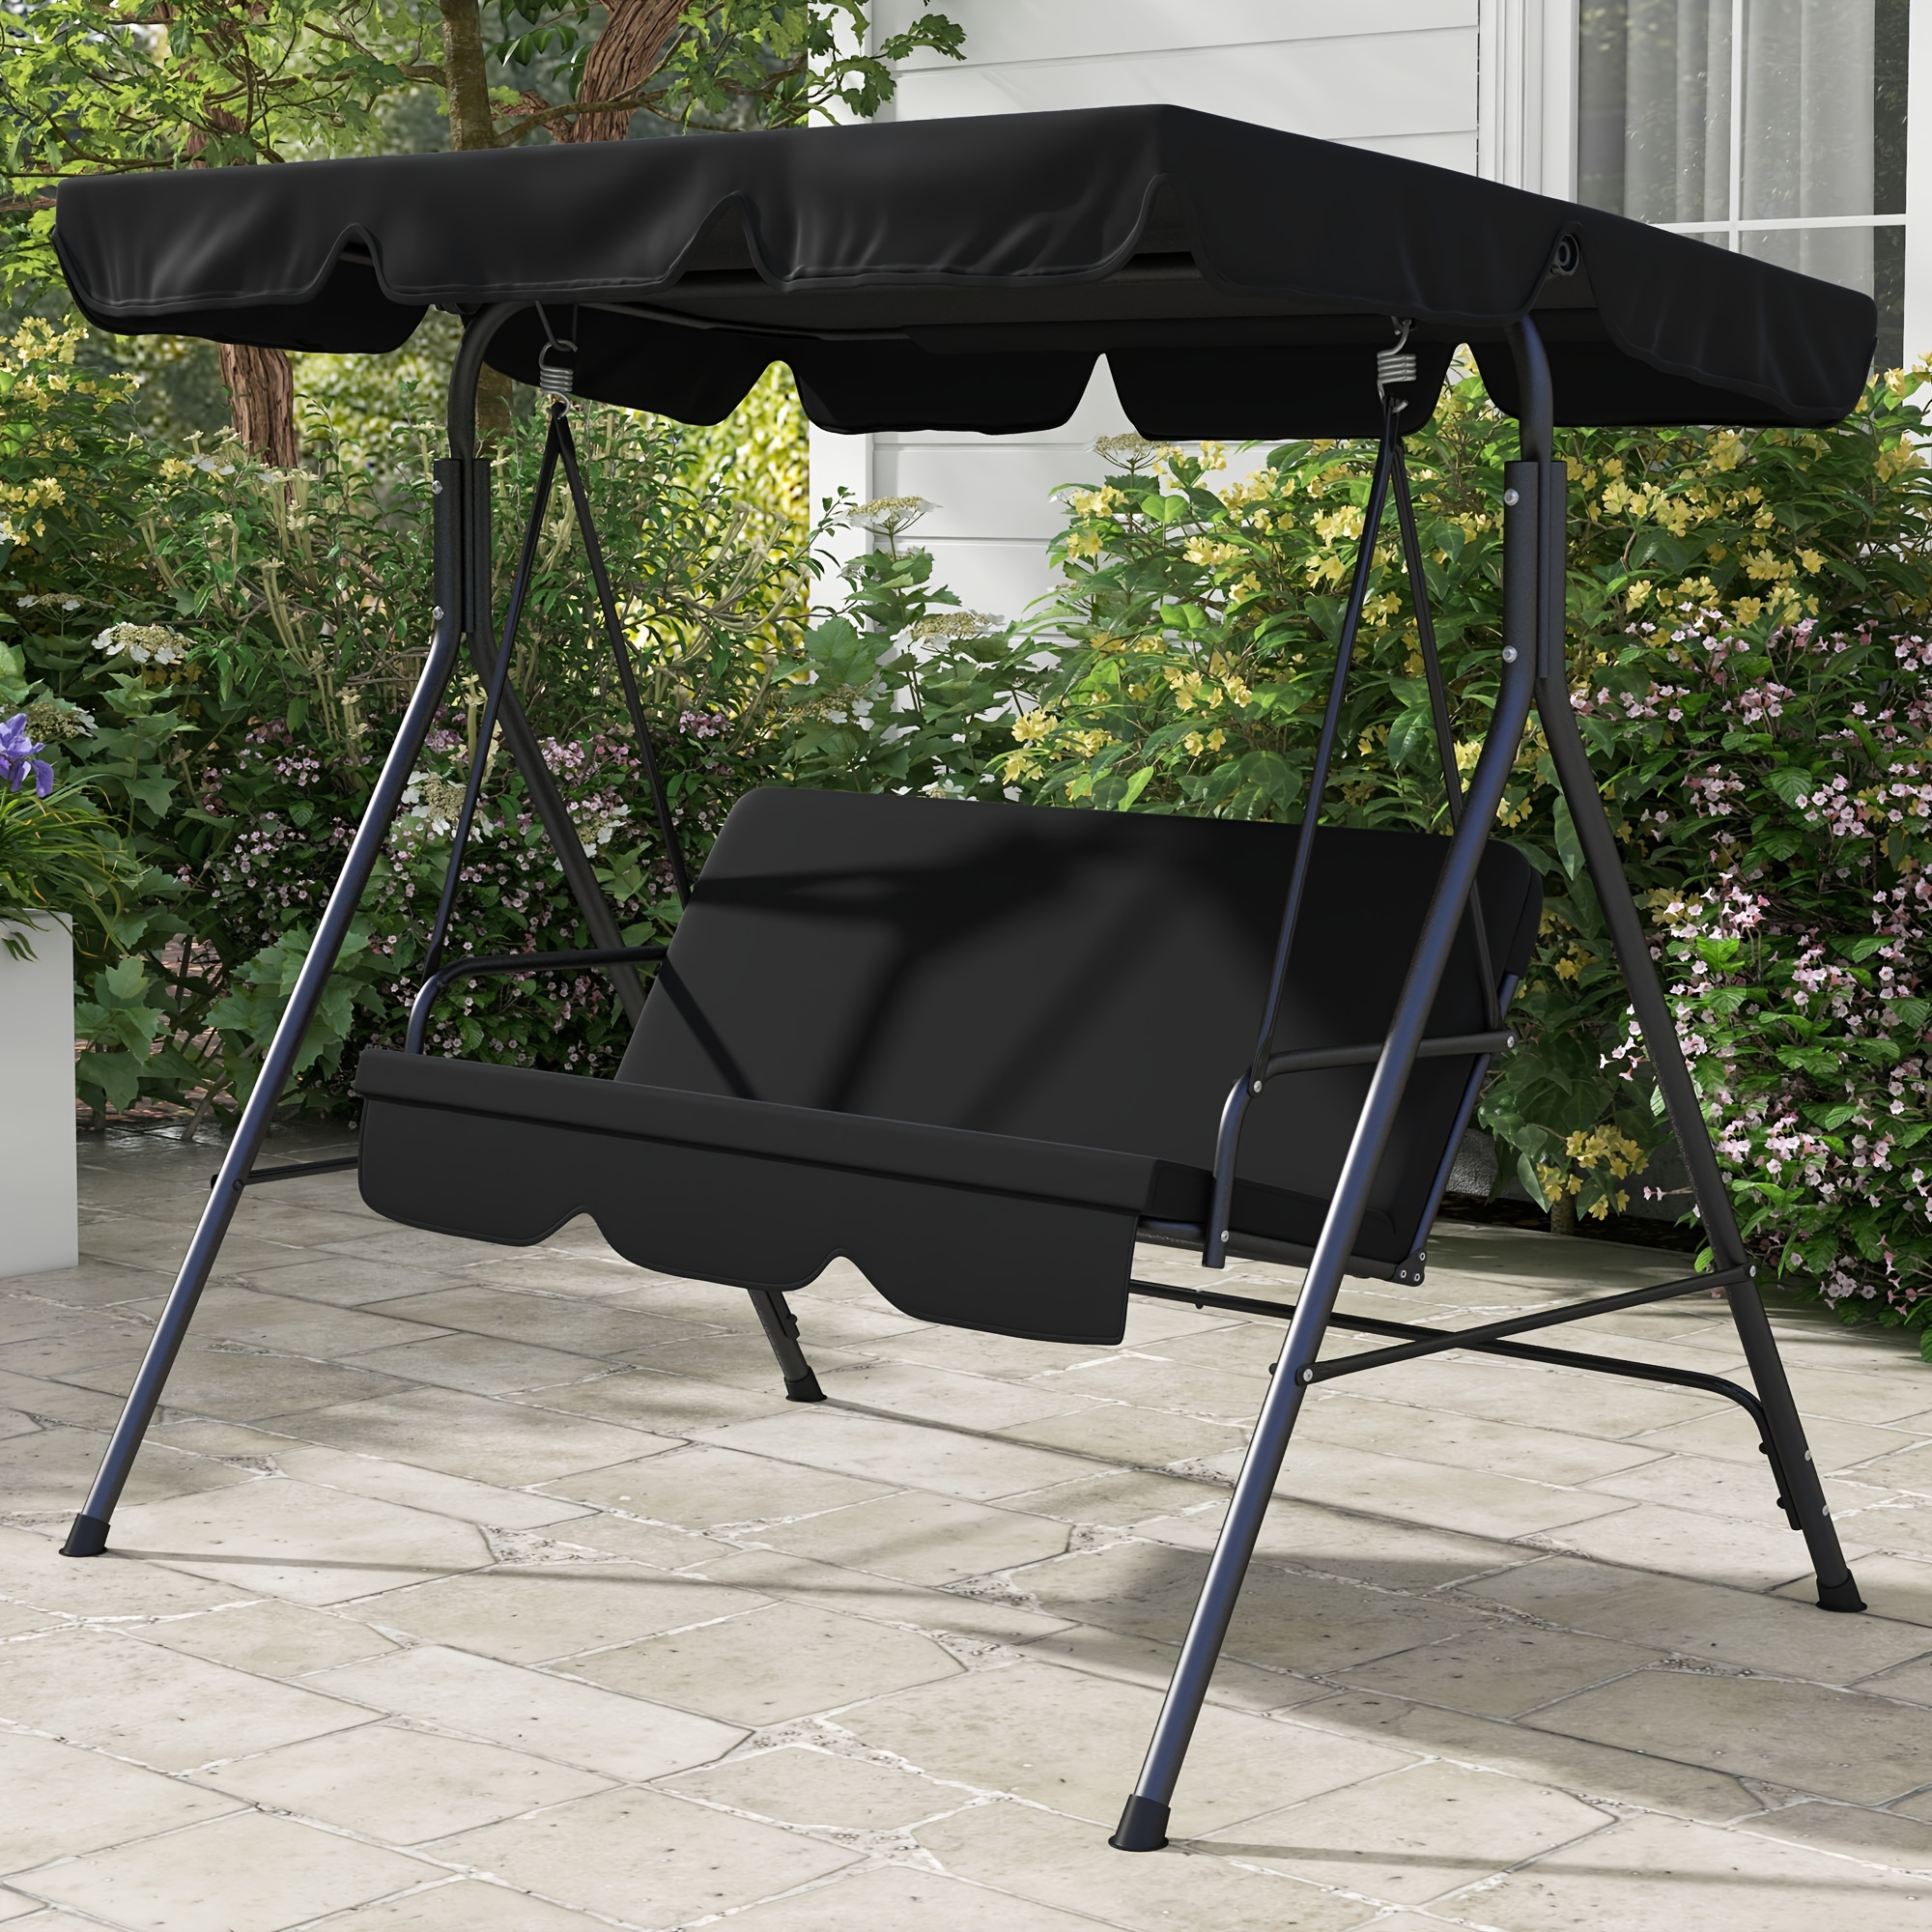 

Outsunny 3-seat Outdoor Patio Swing Chair With Removable Cushion, Steel Frame Stand And Adjustable Tilt Canopy For Patio, Garden, Poolside, Balcony, Backyard, Black